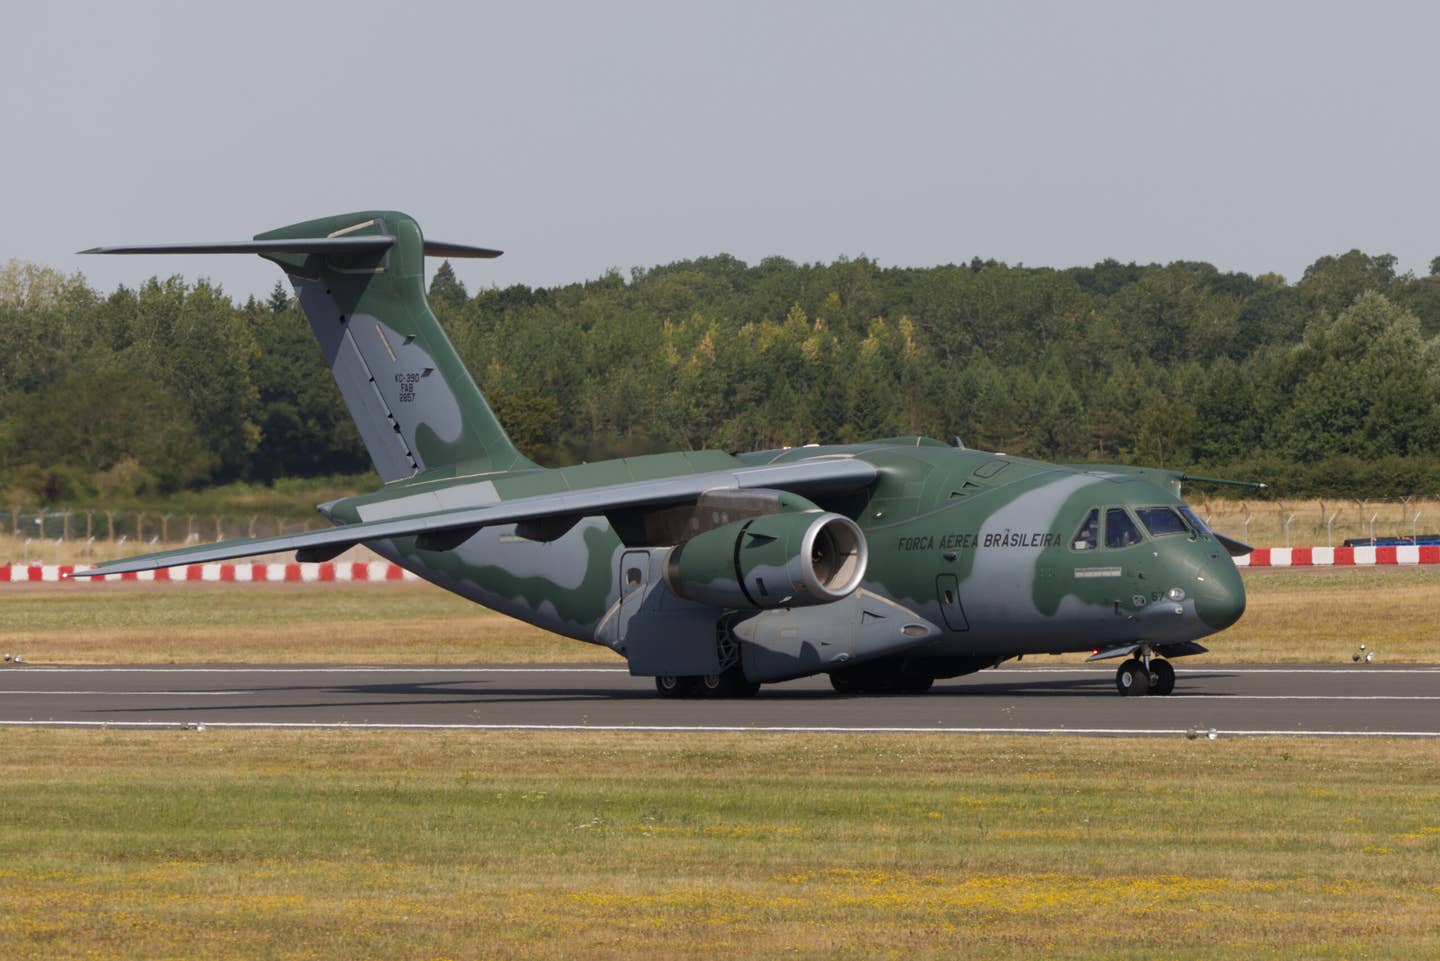 The KC-390 at the RIAT Airshow 2022. <em>Credit: Ronnie Macdonald/Wikimedia Commons</em>